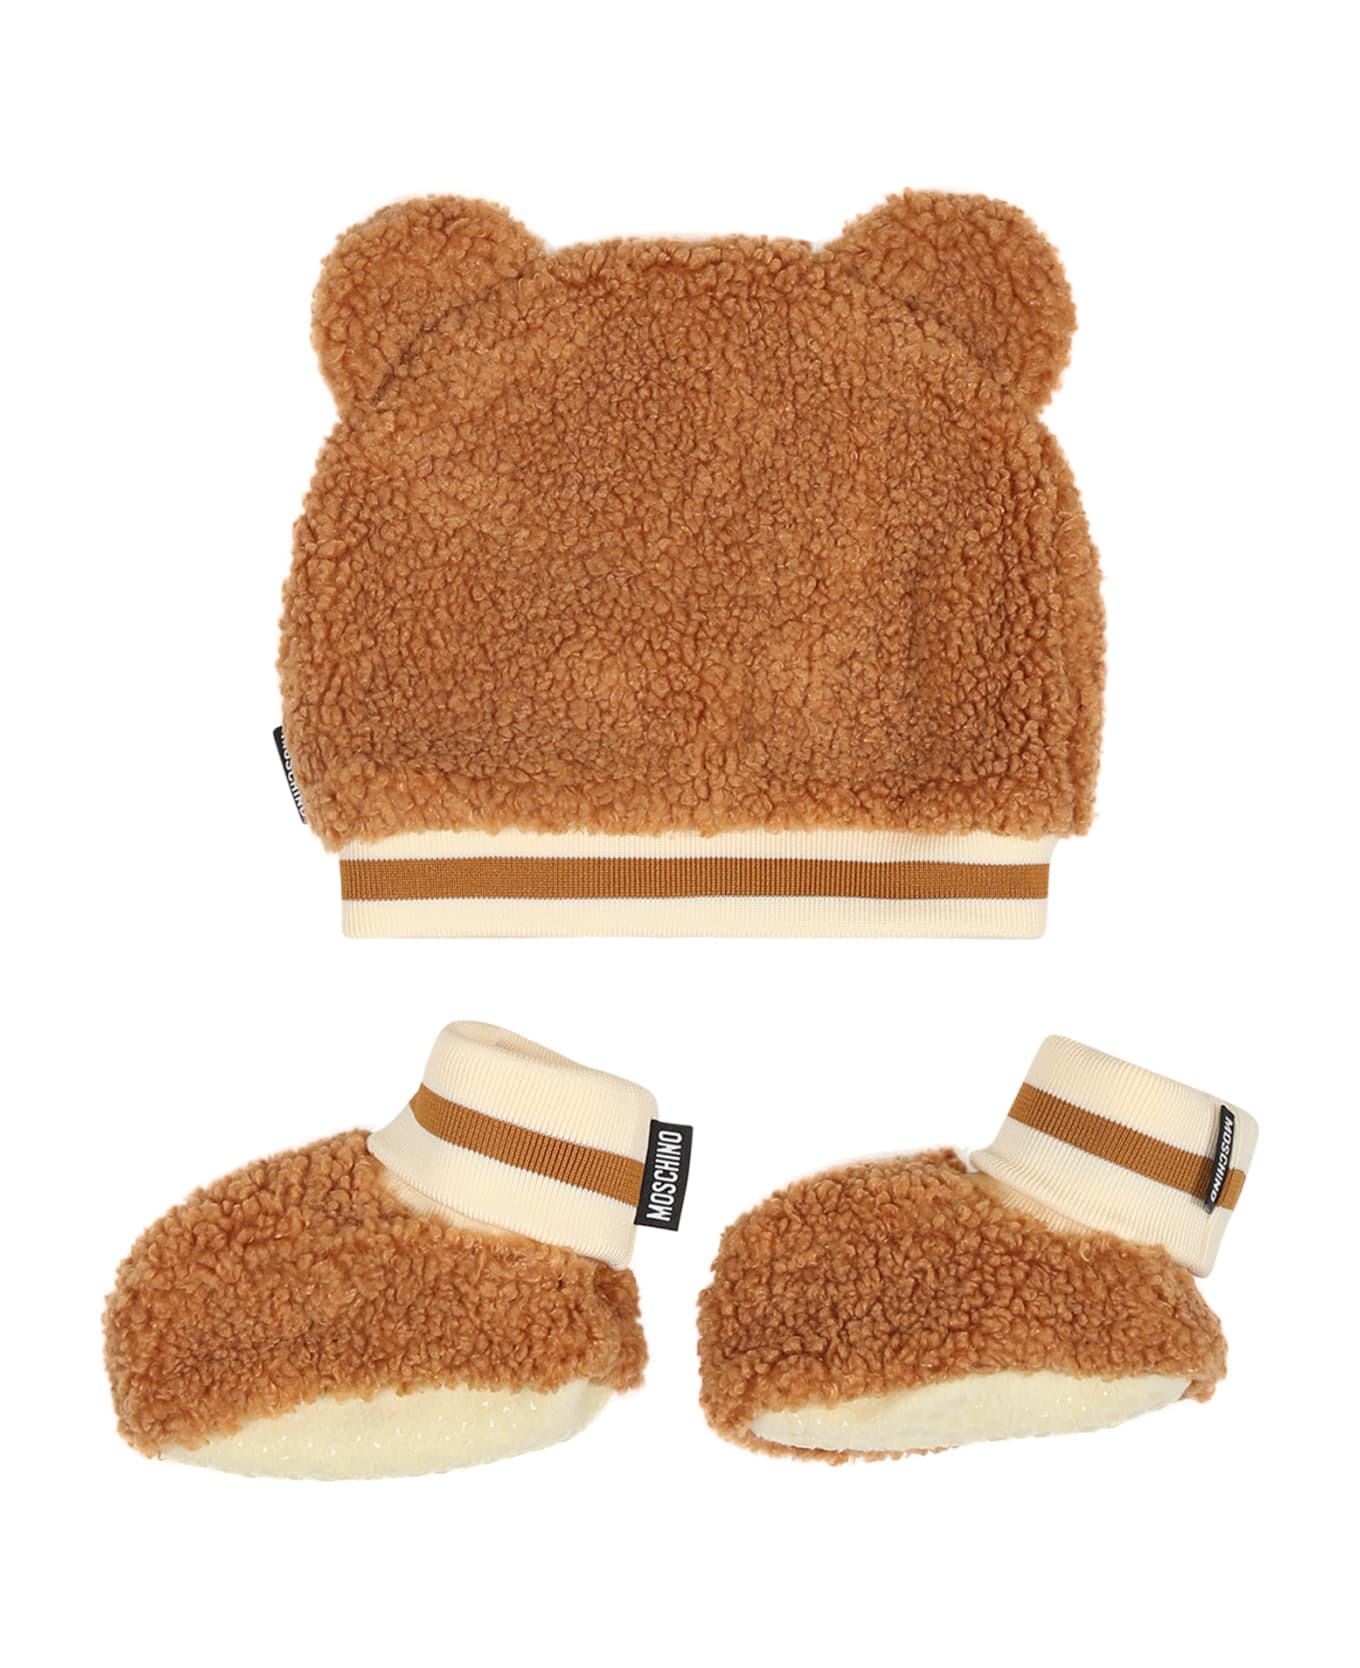 Moschino Brown Set For Babykids With Teddy Bear - Brown アクセサリー＆ギフト